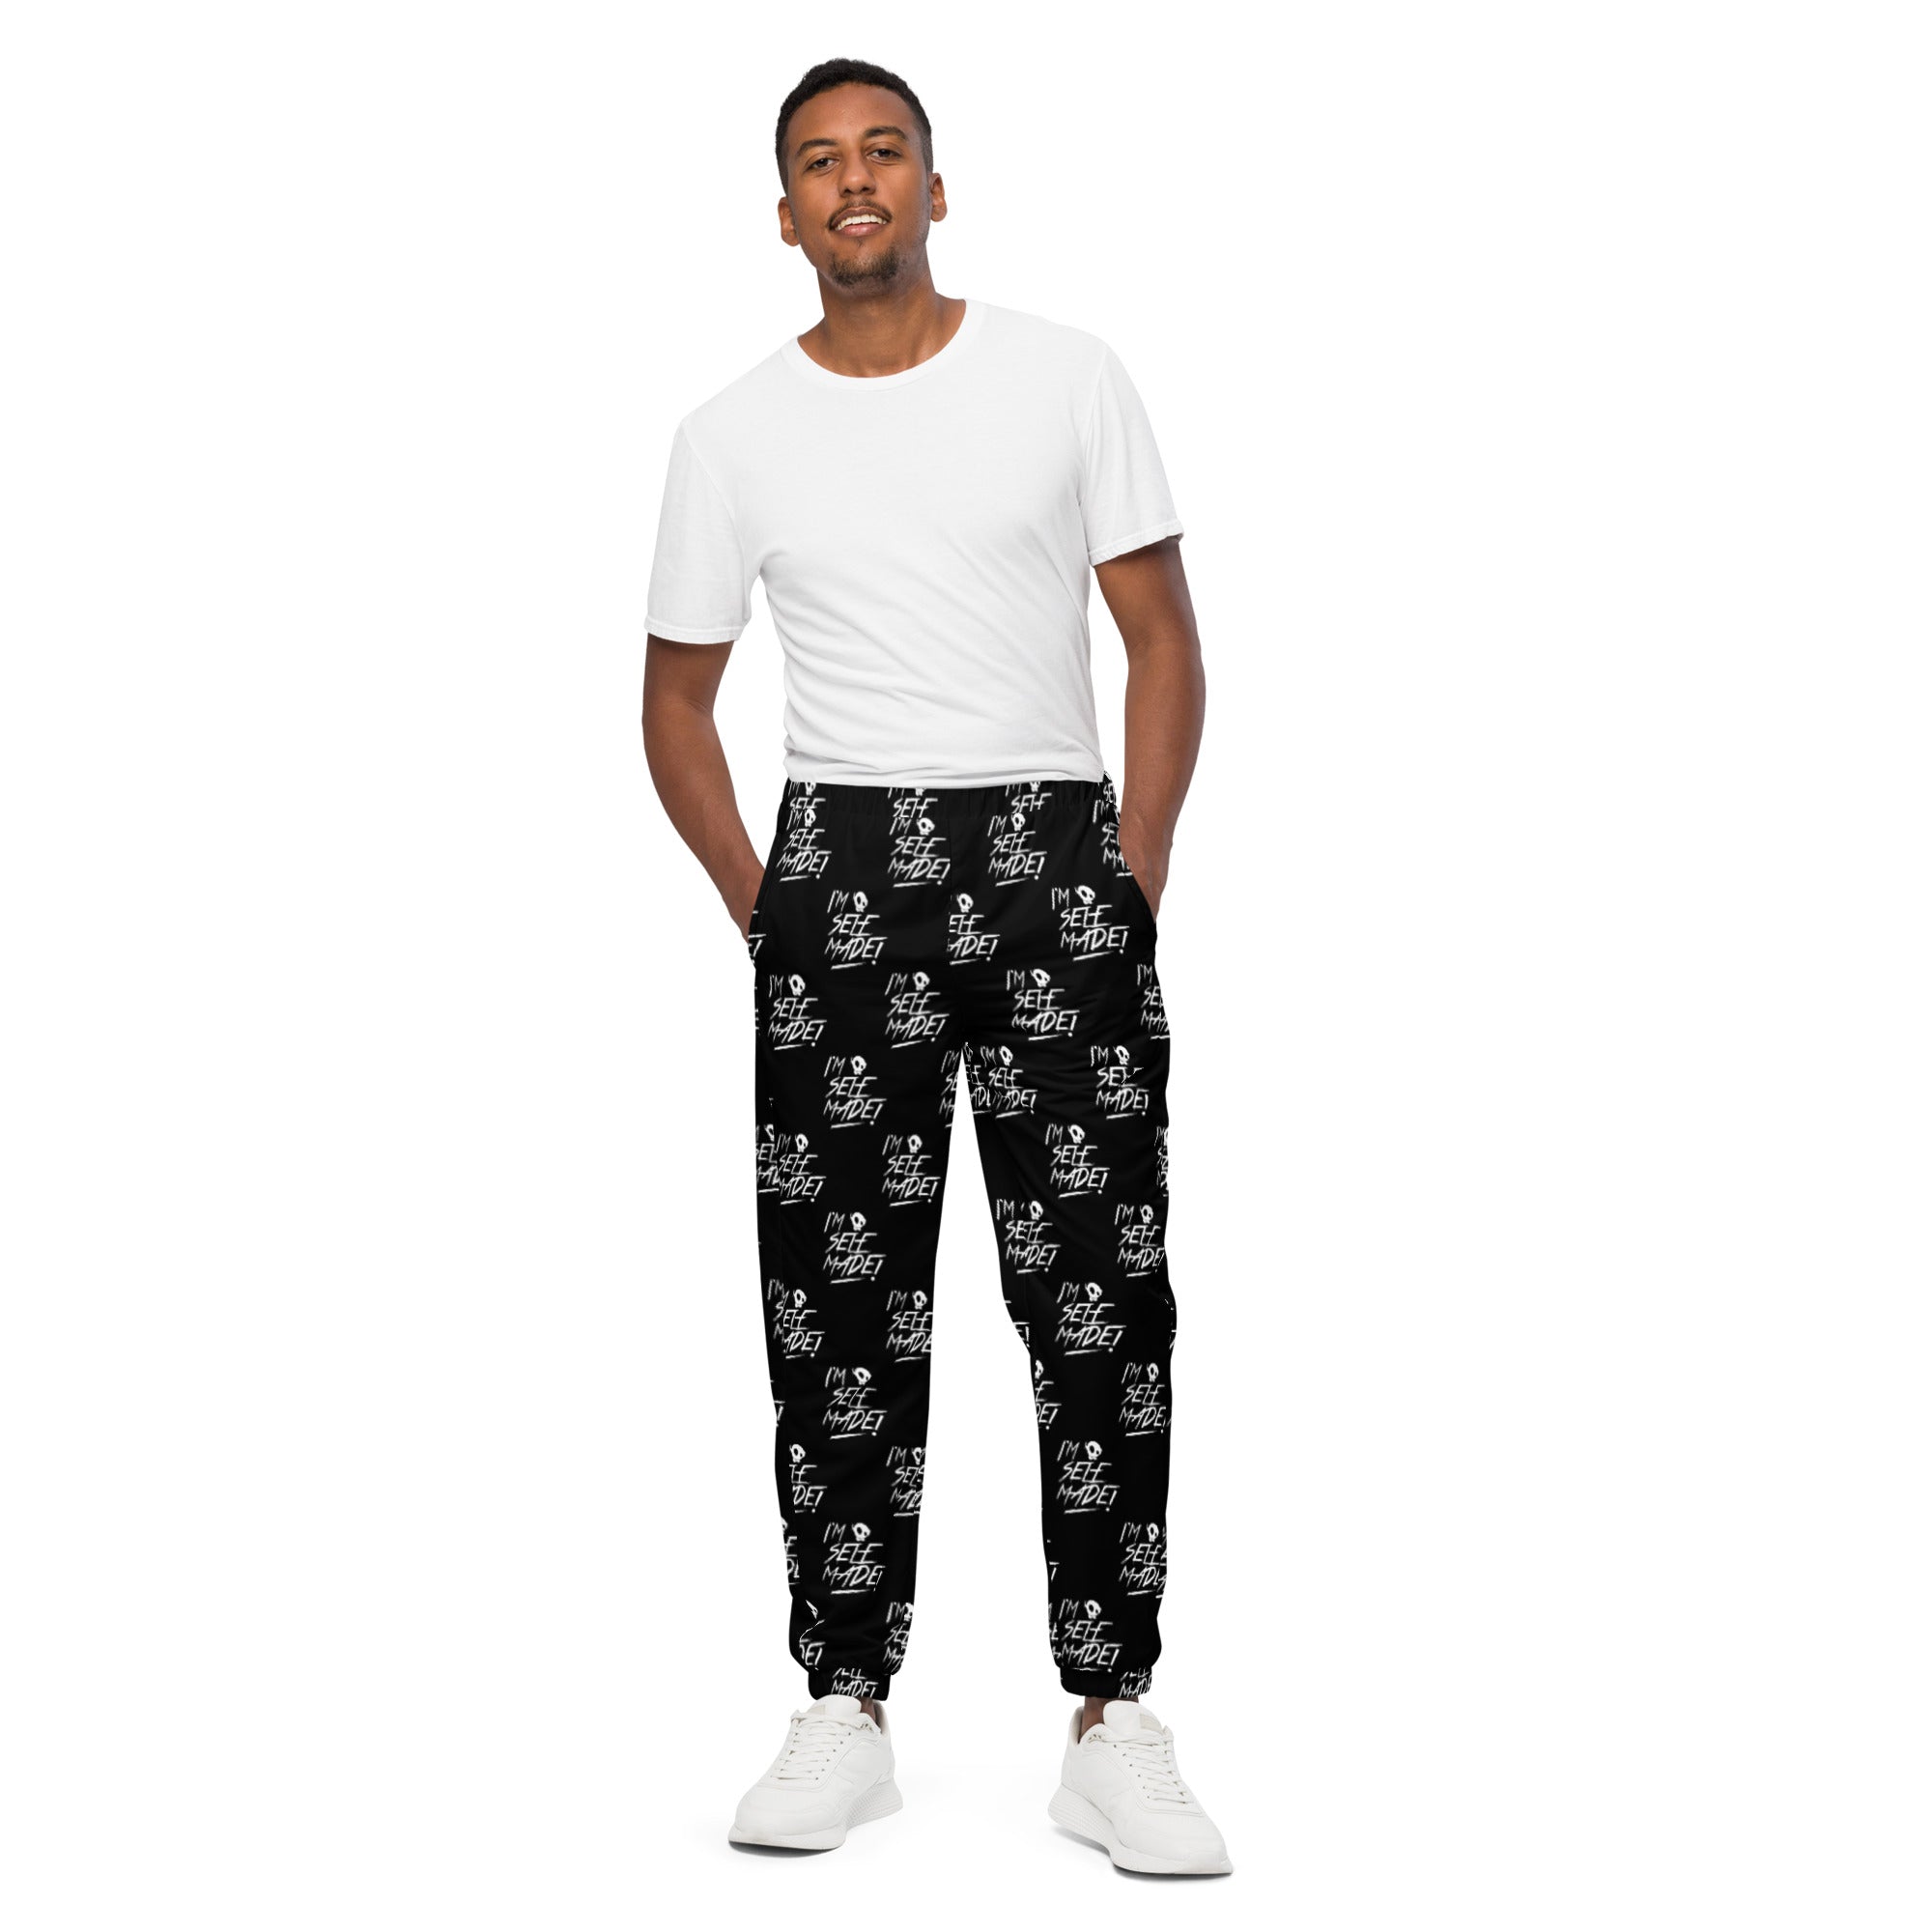 "SELF MADE!" ALL-OVER BLK TRACK PANTS